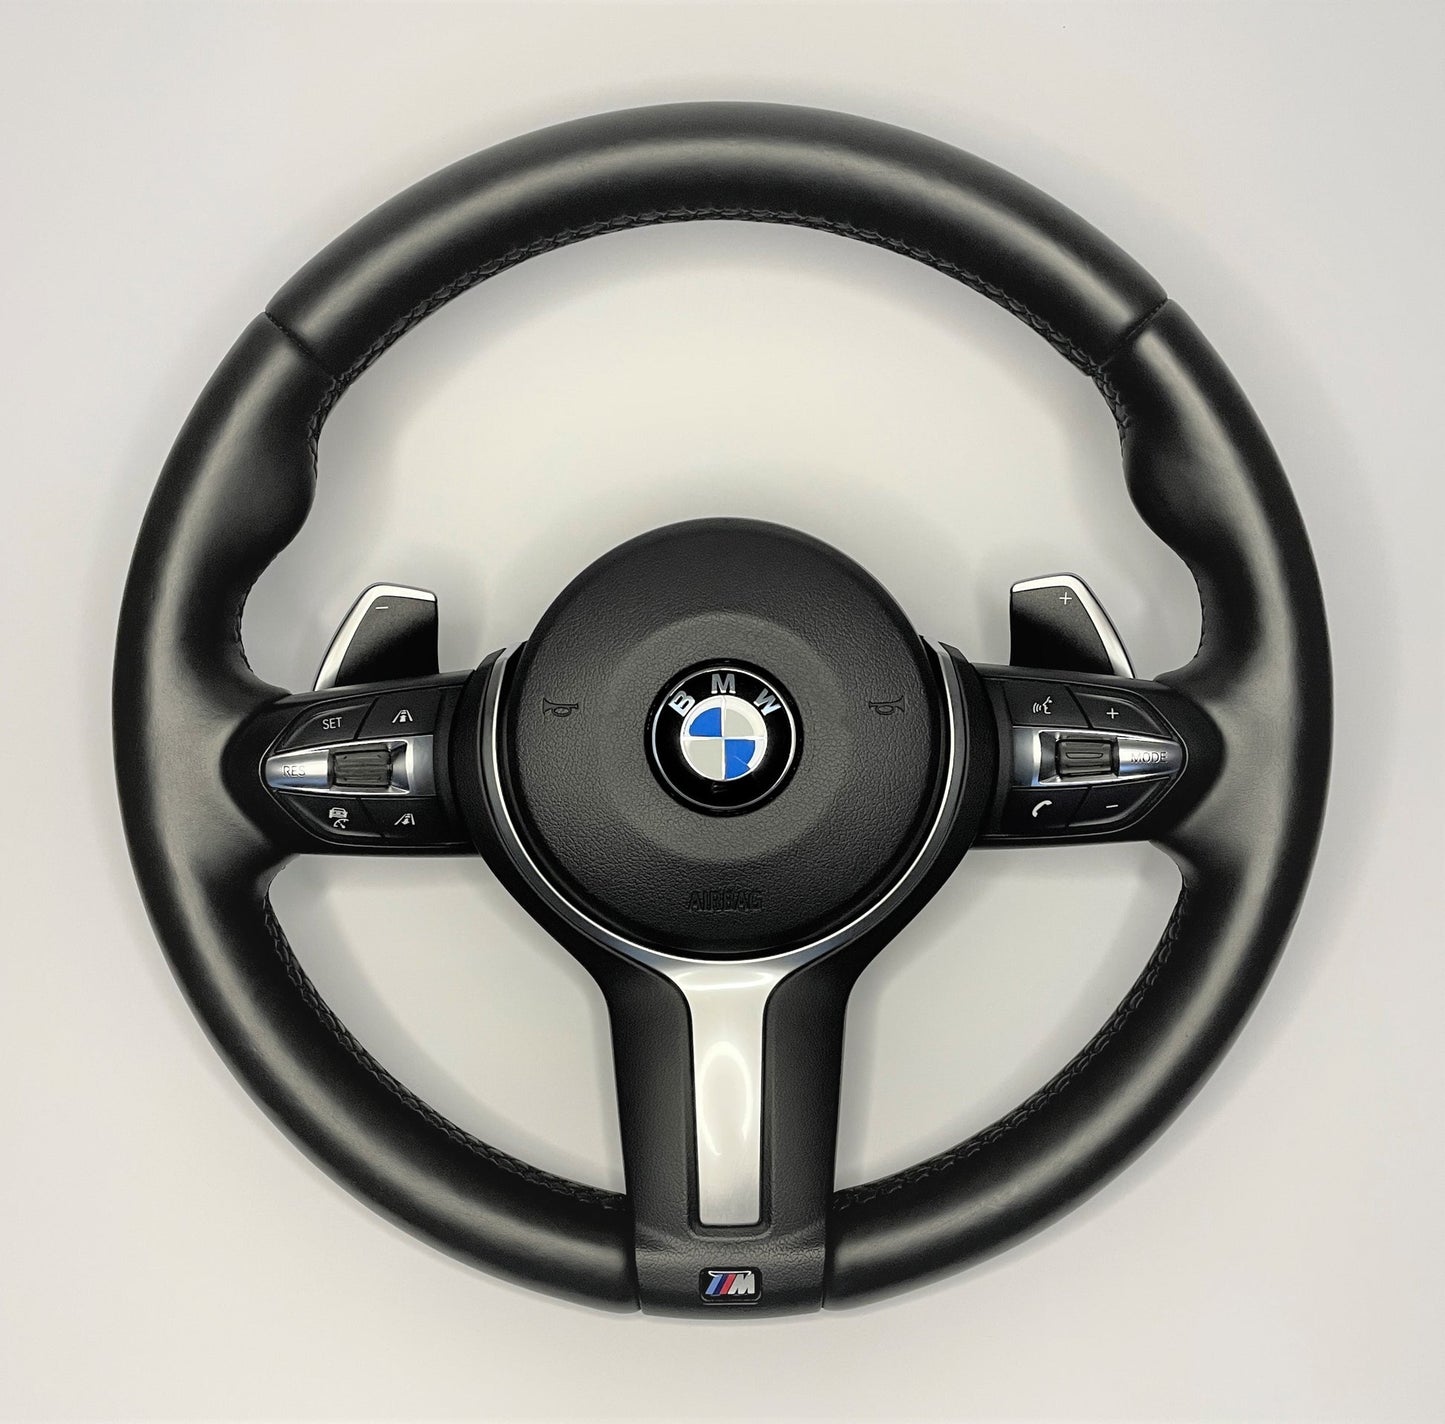 Smart LED RPM Paddle Shifter - BMW F Series All Model (M Sport Steering Wheel)